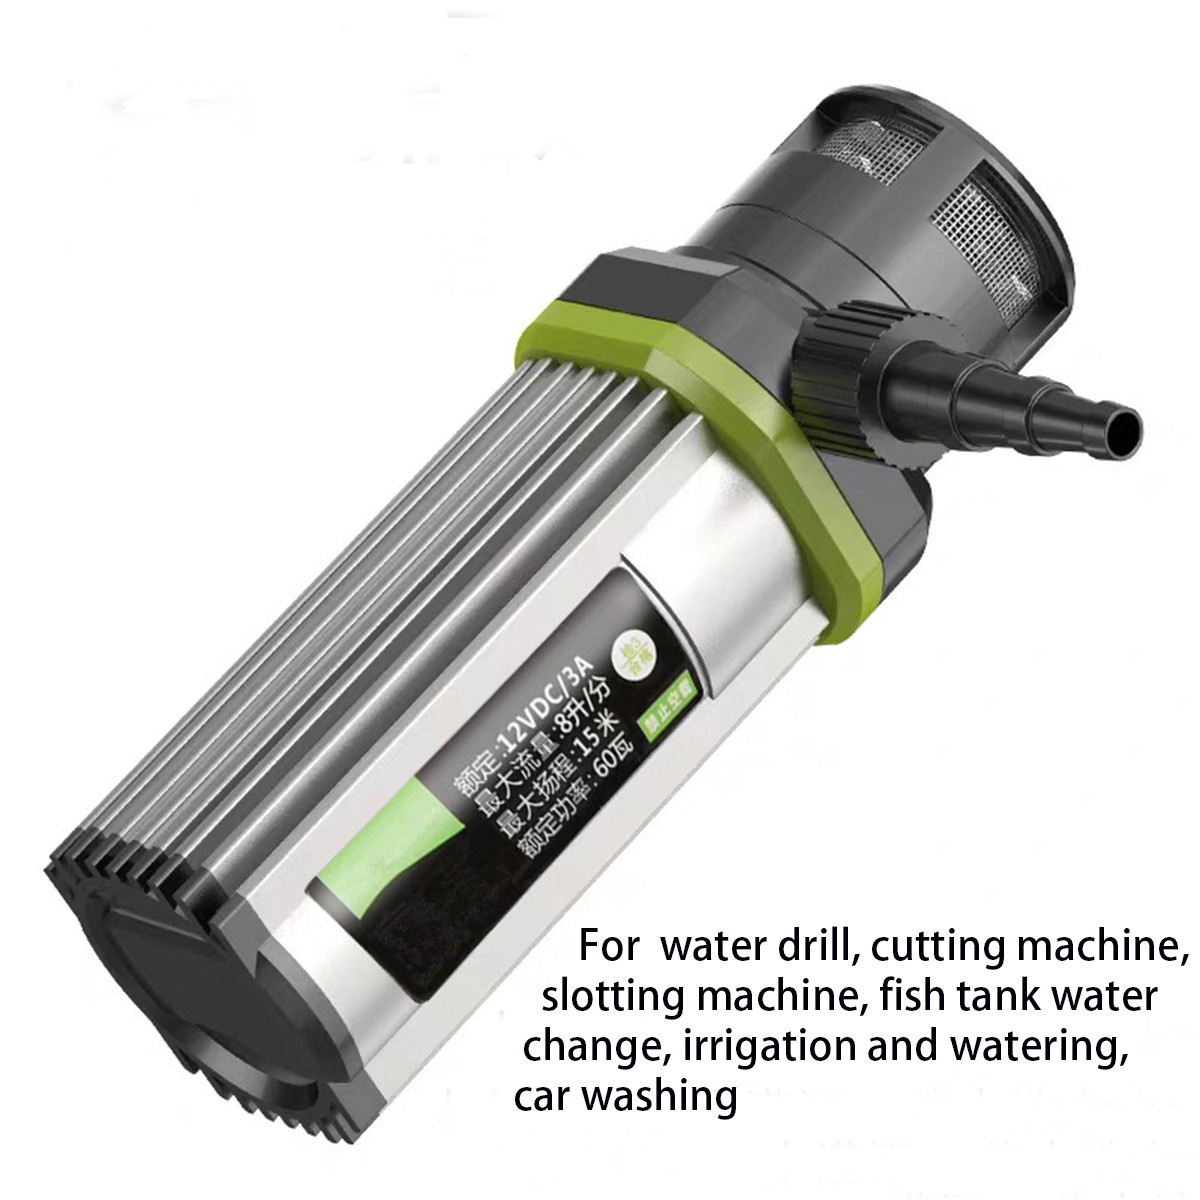 12V-6810mm-Small-Water-Pump-Household-for-Water-Drill-Cutting-Machine-Fish-Tank-Pump-1845328-7